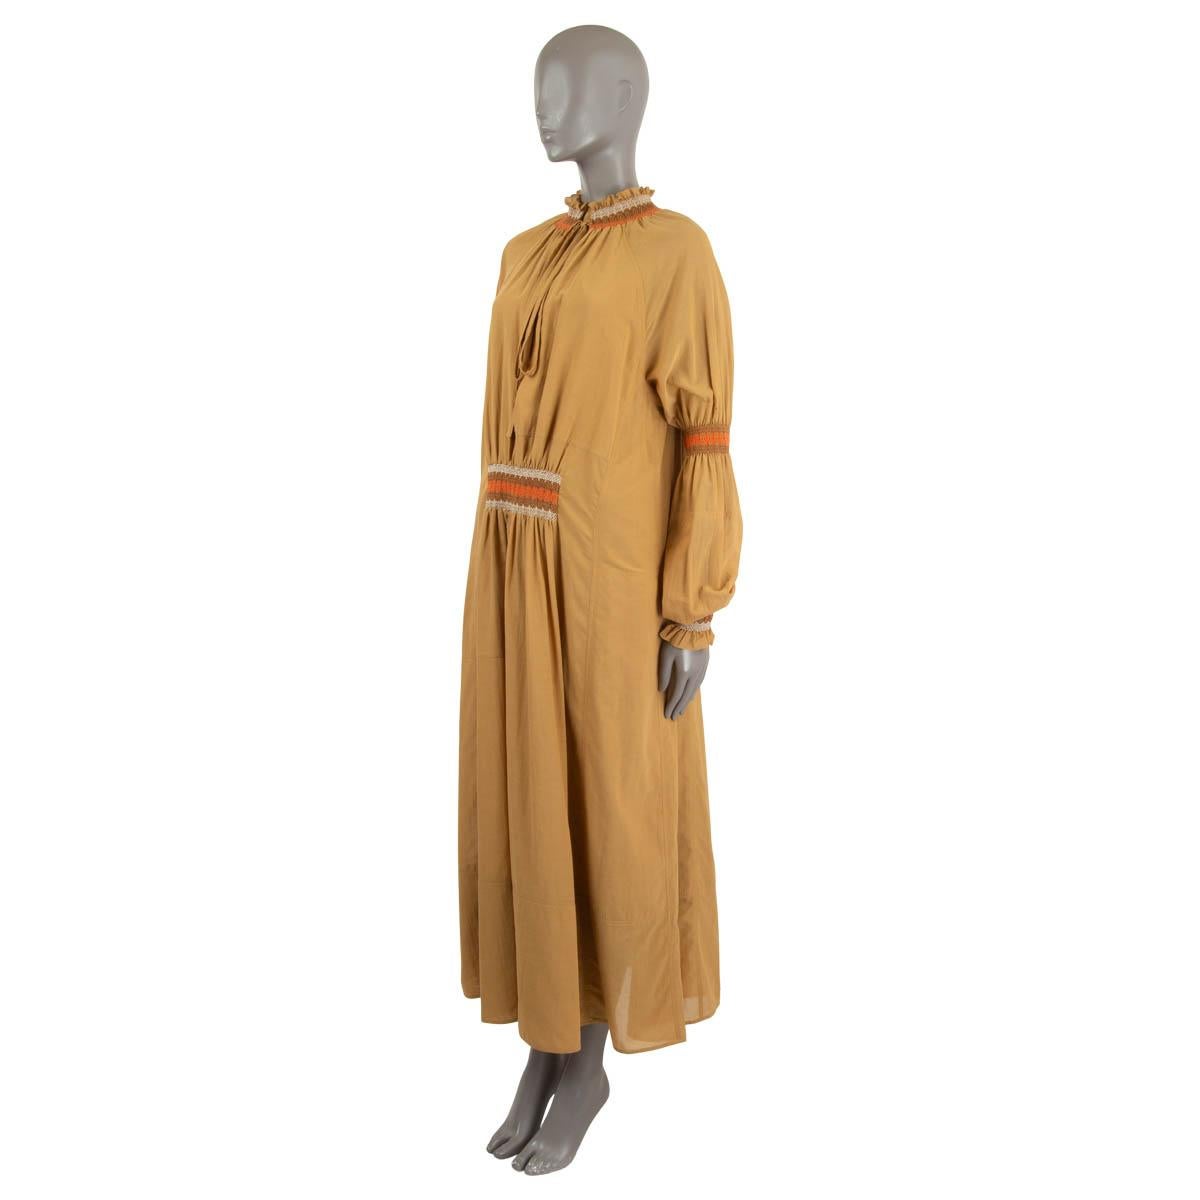 100% authentic Loewe long sleeve maxi dress in camel silk (100%) with a keyhole-neck. Features orange, white and brown  embroidered smocking on the neck arm and front. Closes on the front with string. Lined in silk (100%). Has been worn and is in